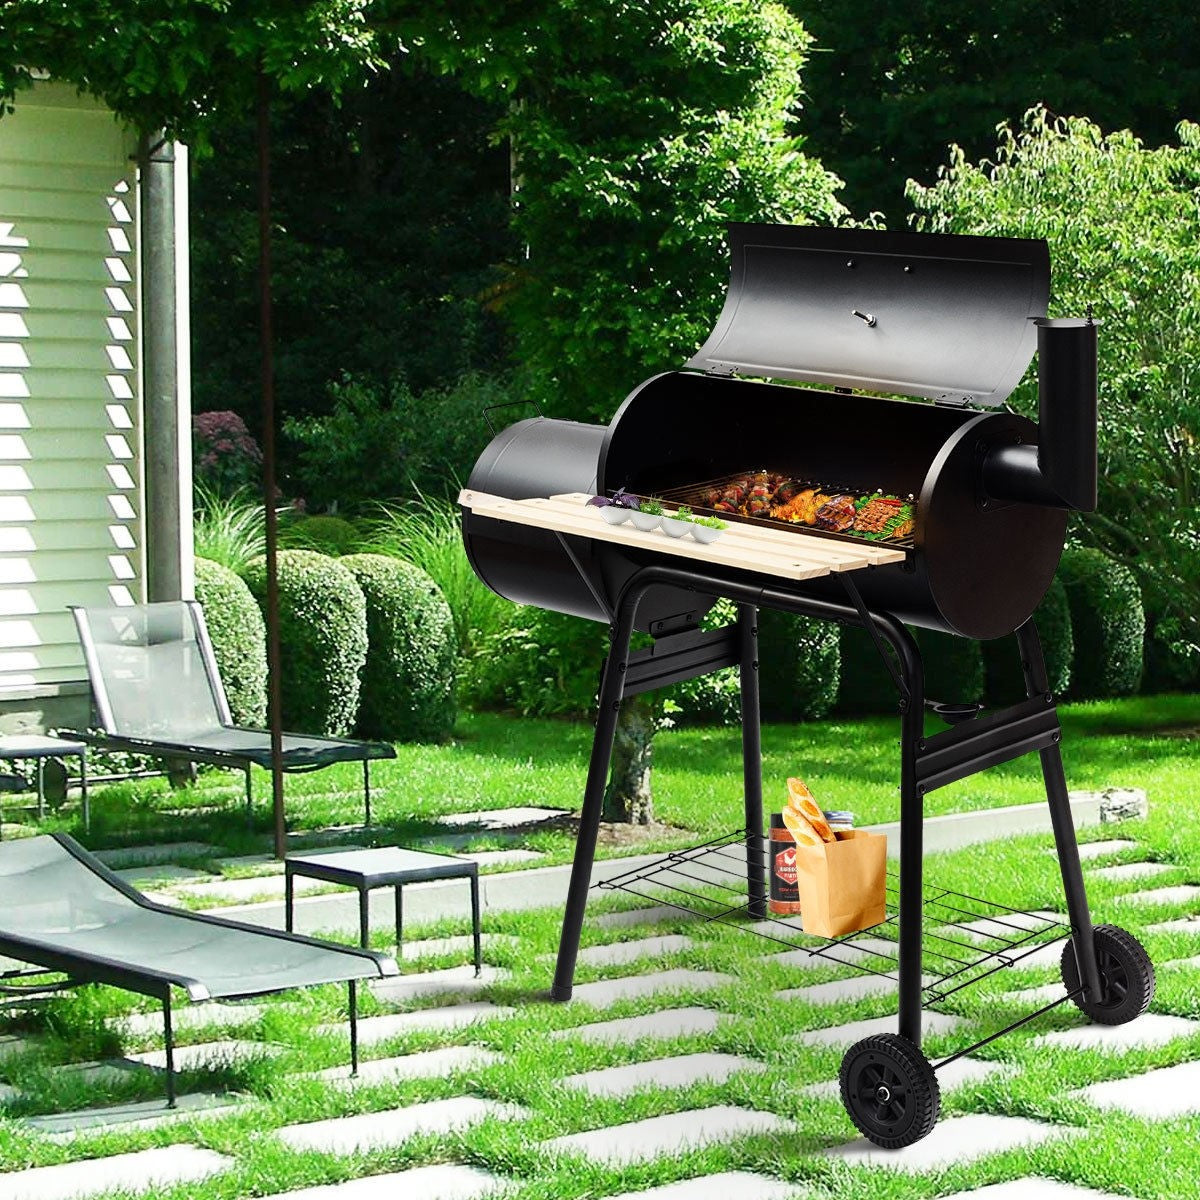 Outdoor BBQ Grill - Barbecue Charcoal Grill - Westfield Retailers